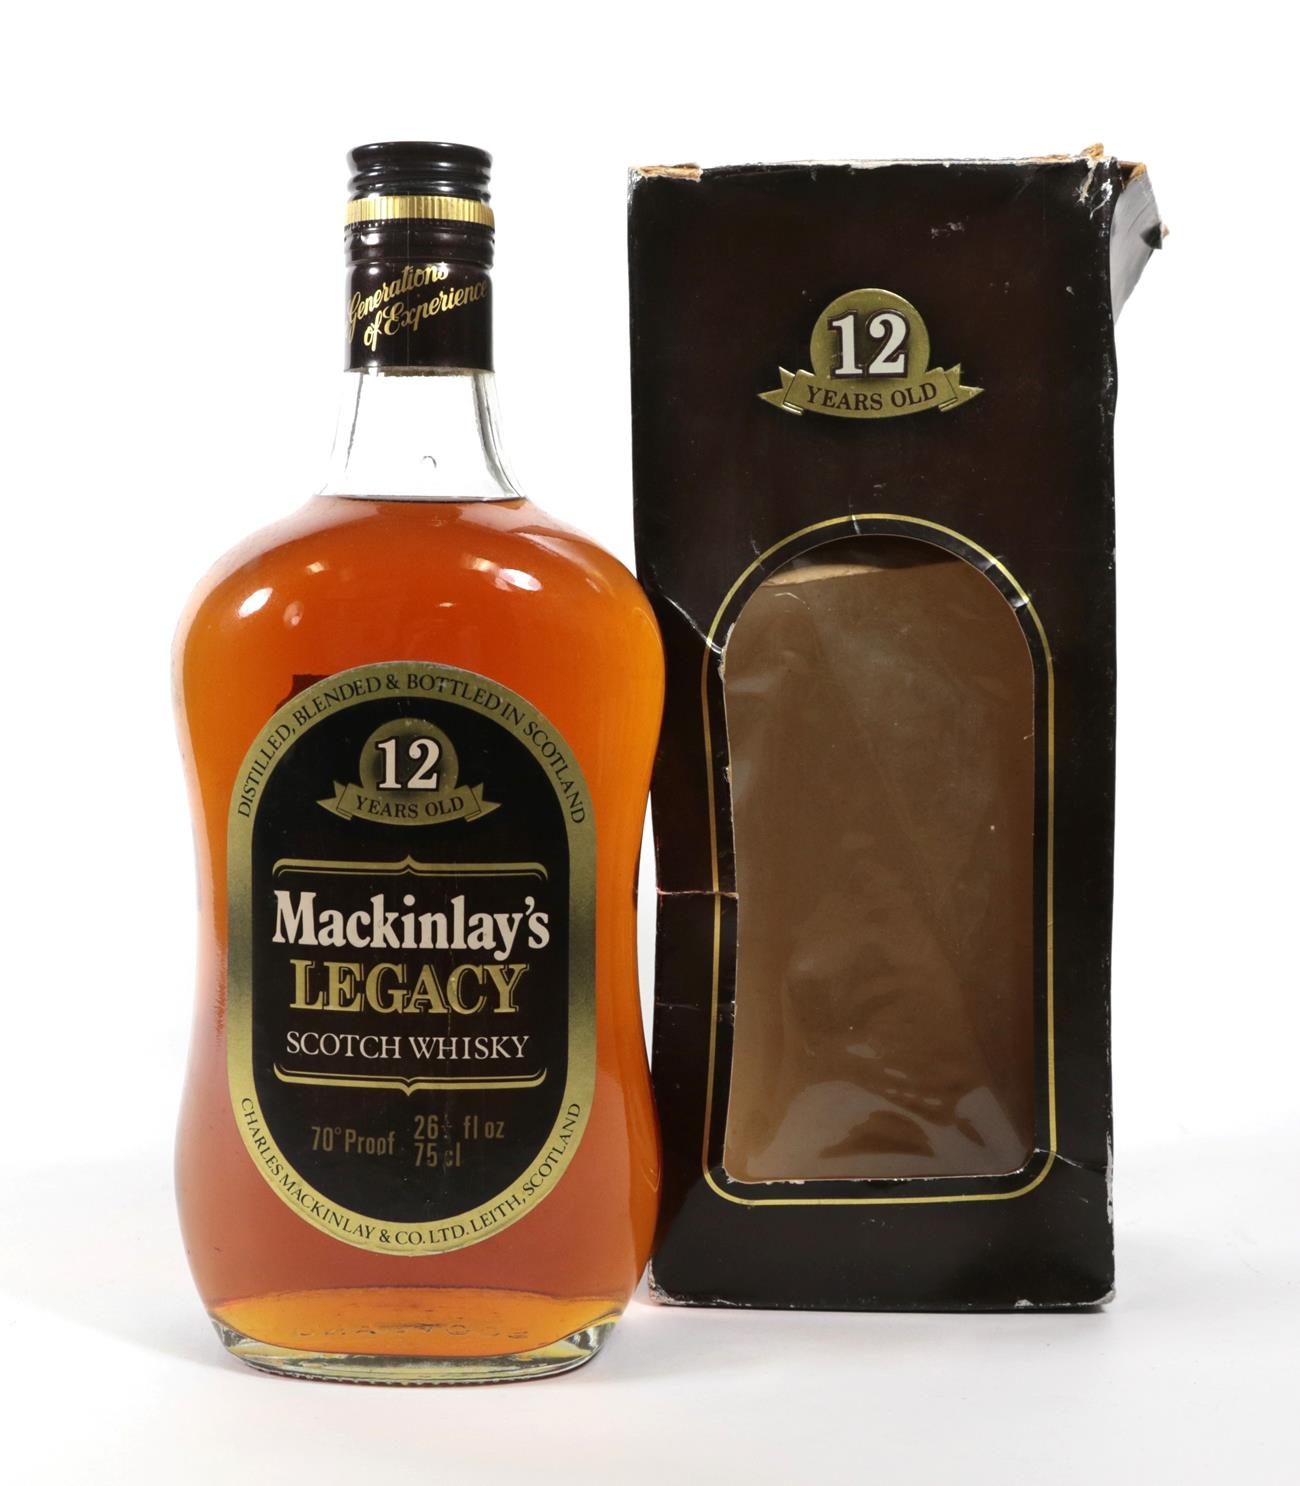 Lot 5077 - Mackinlay's Legacy Scotch Whisky, 1970s bottling, 70° proof, 262/3 fl. ozs. (one bottle)